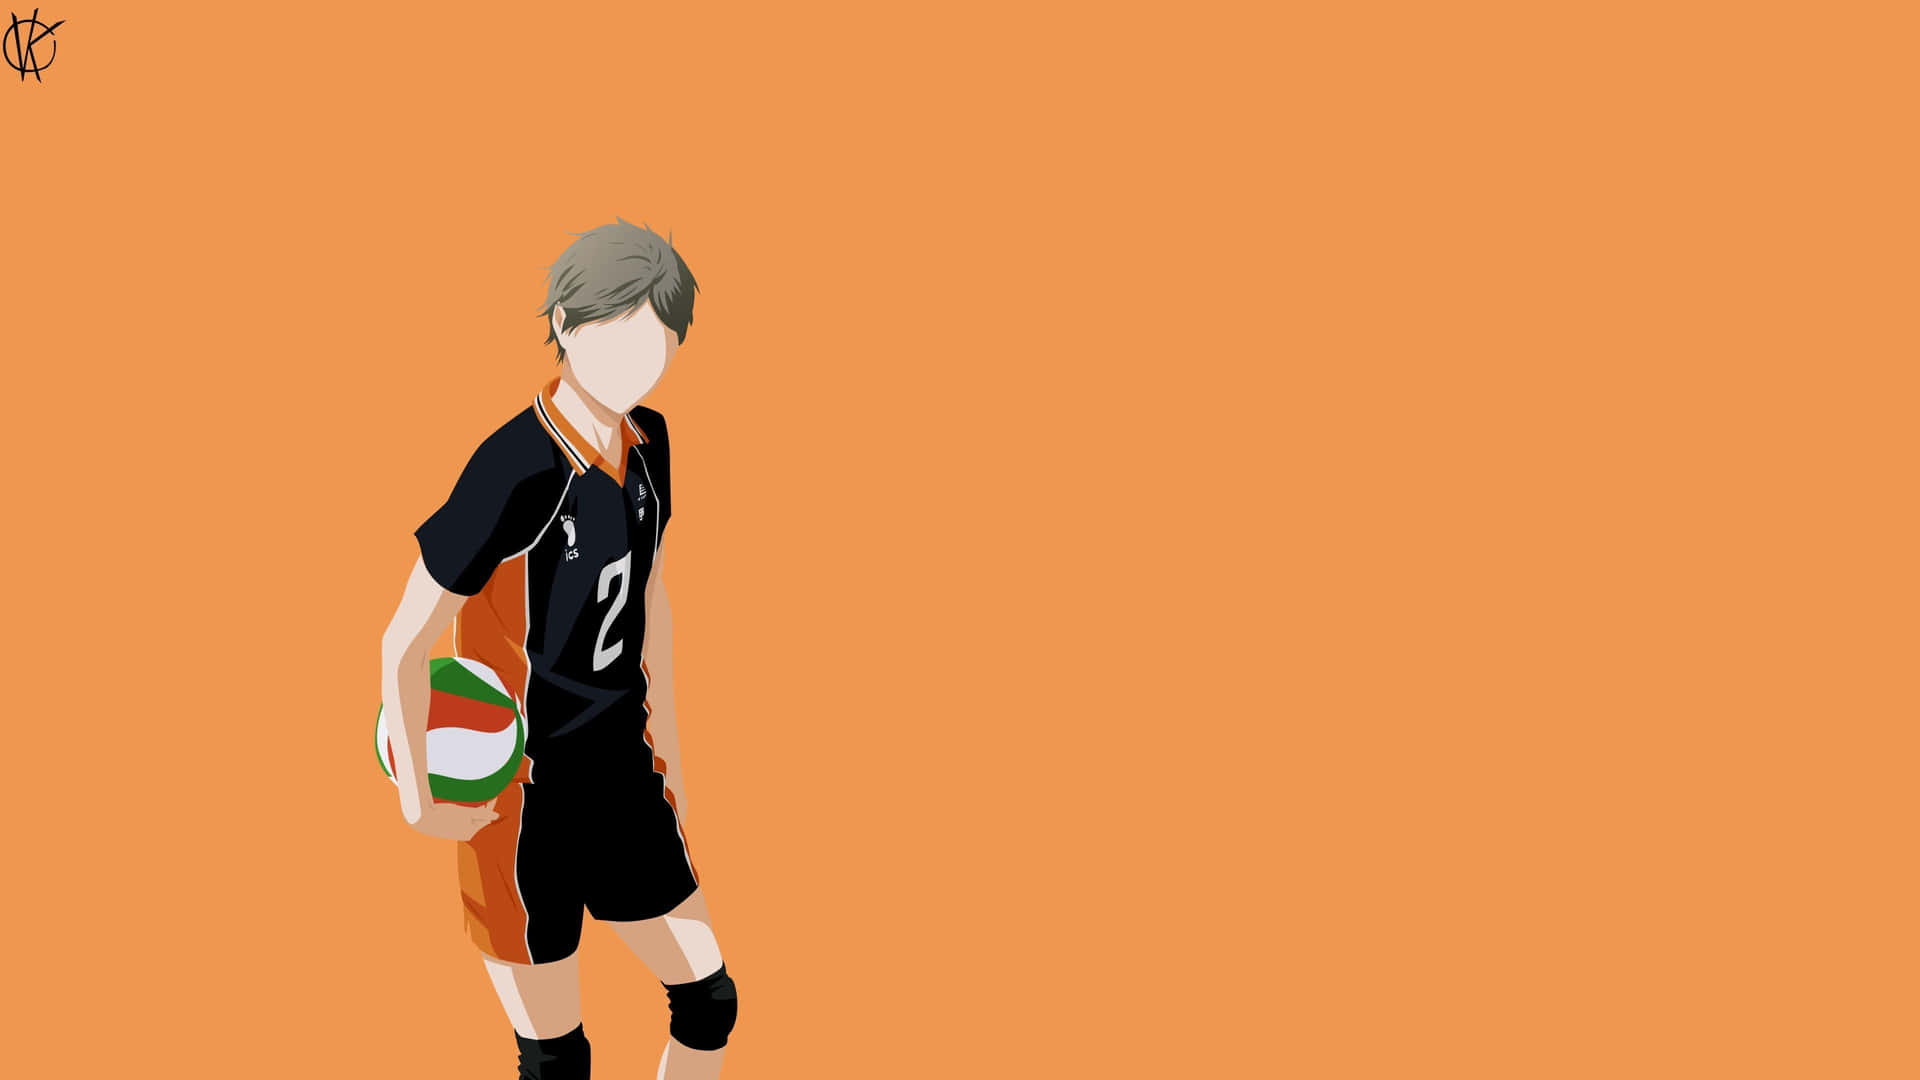 A laptop featuring the Haikyuu anime series, perfect for any fan of the show. Wallpaper